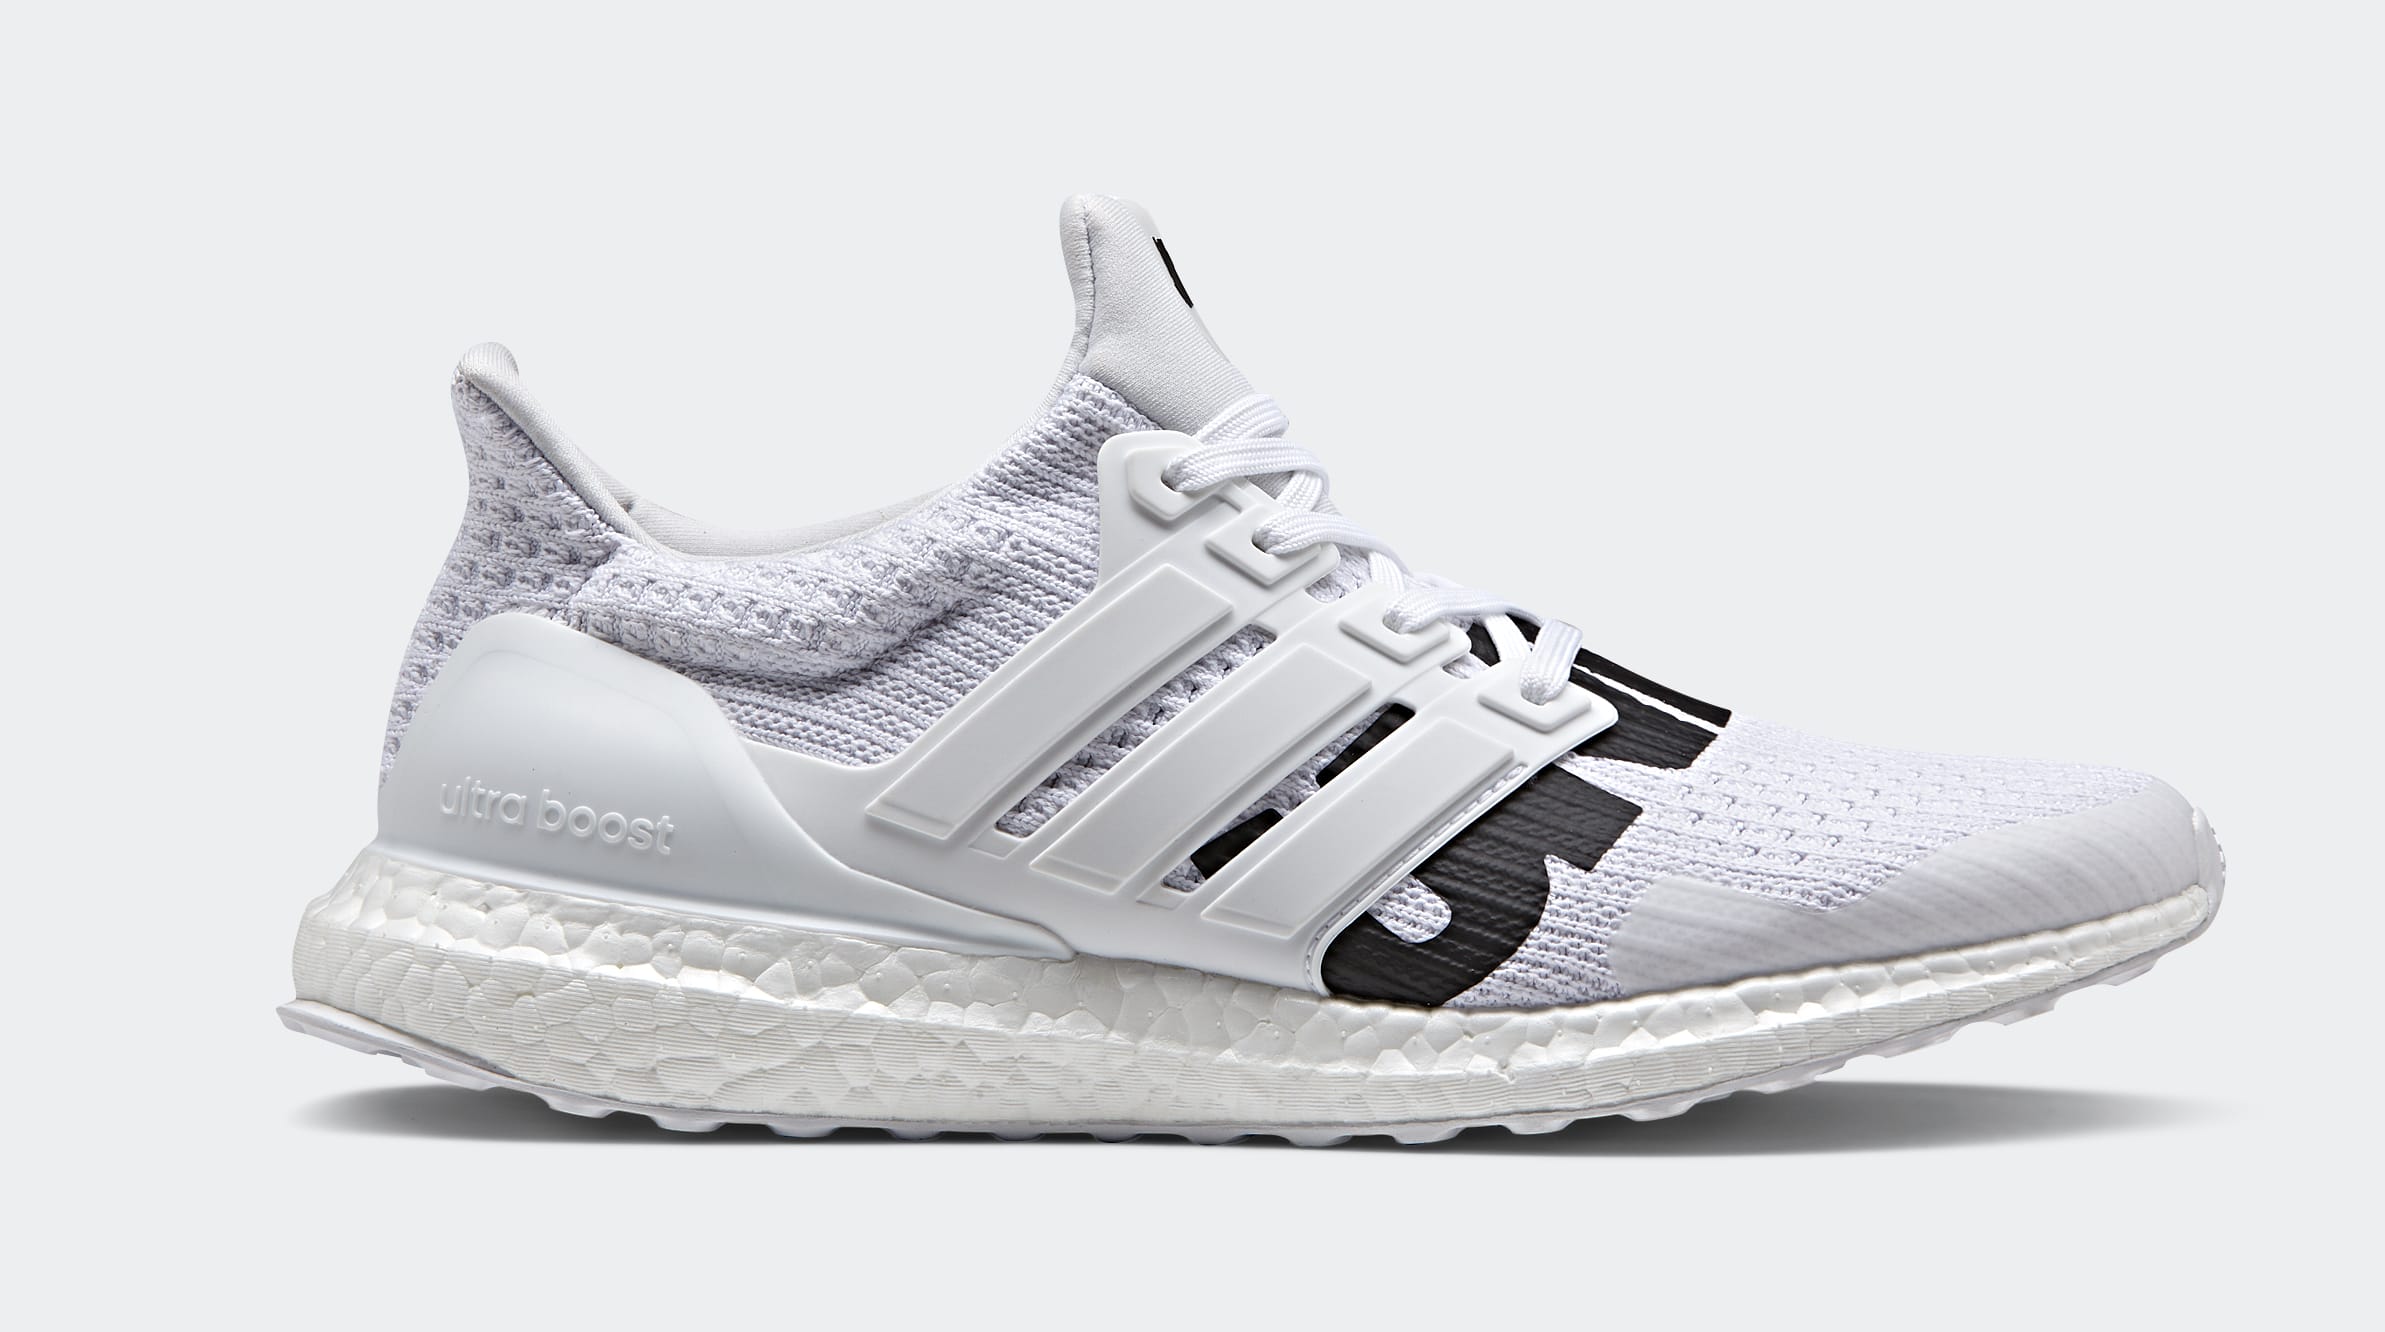 Undefeated x Adidas Ultra Boost BB9102 (Lateral)